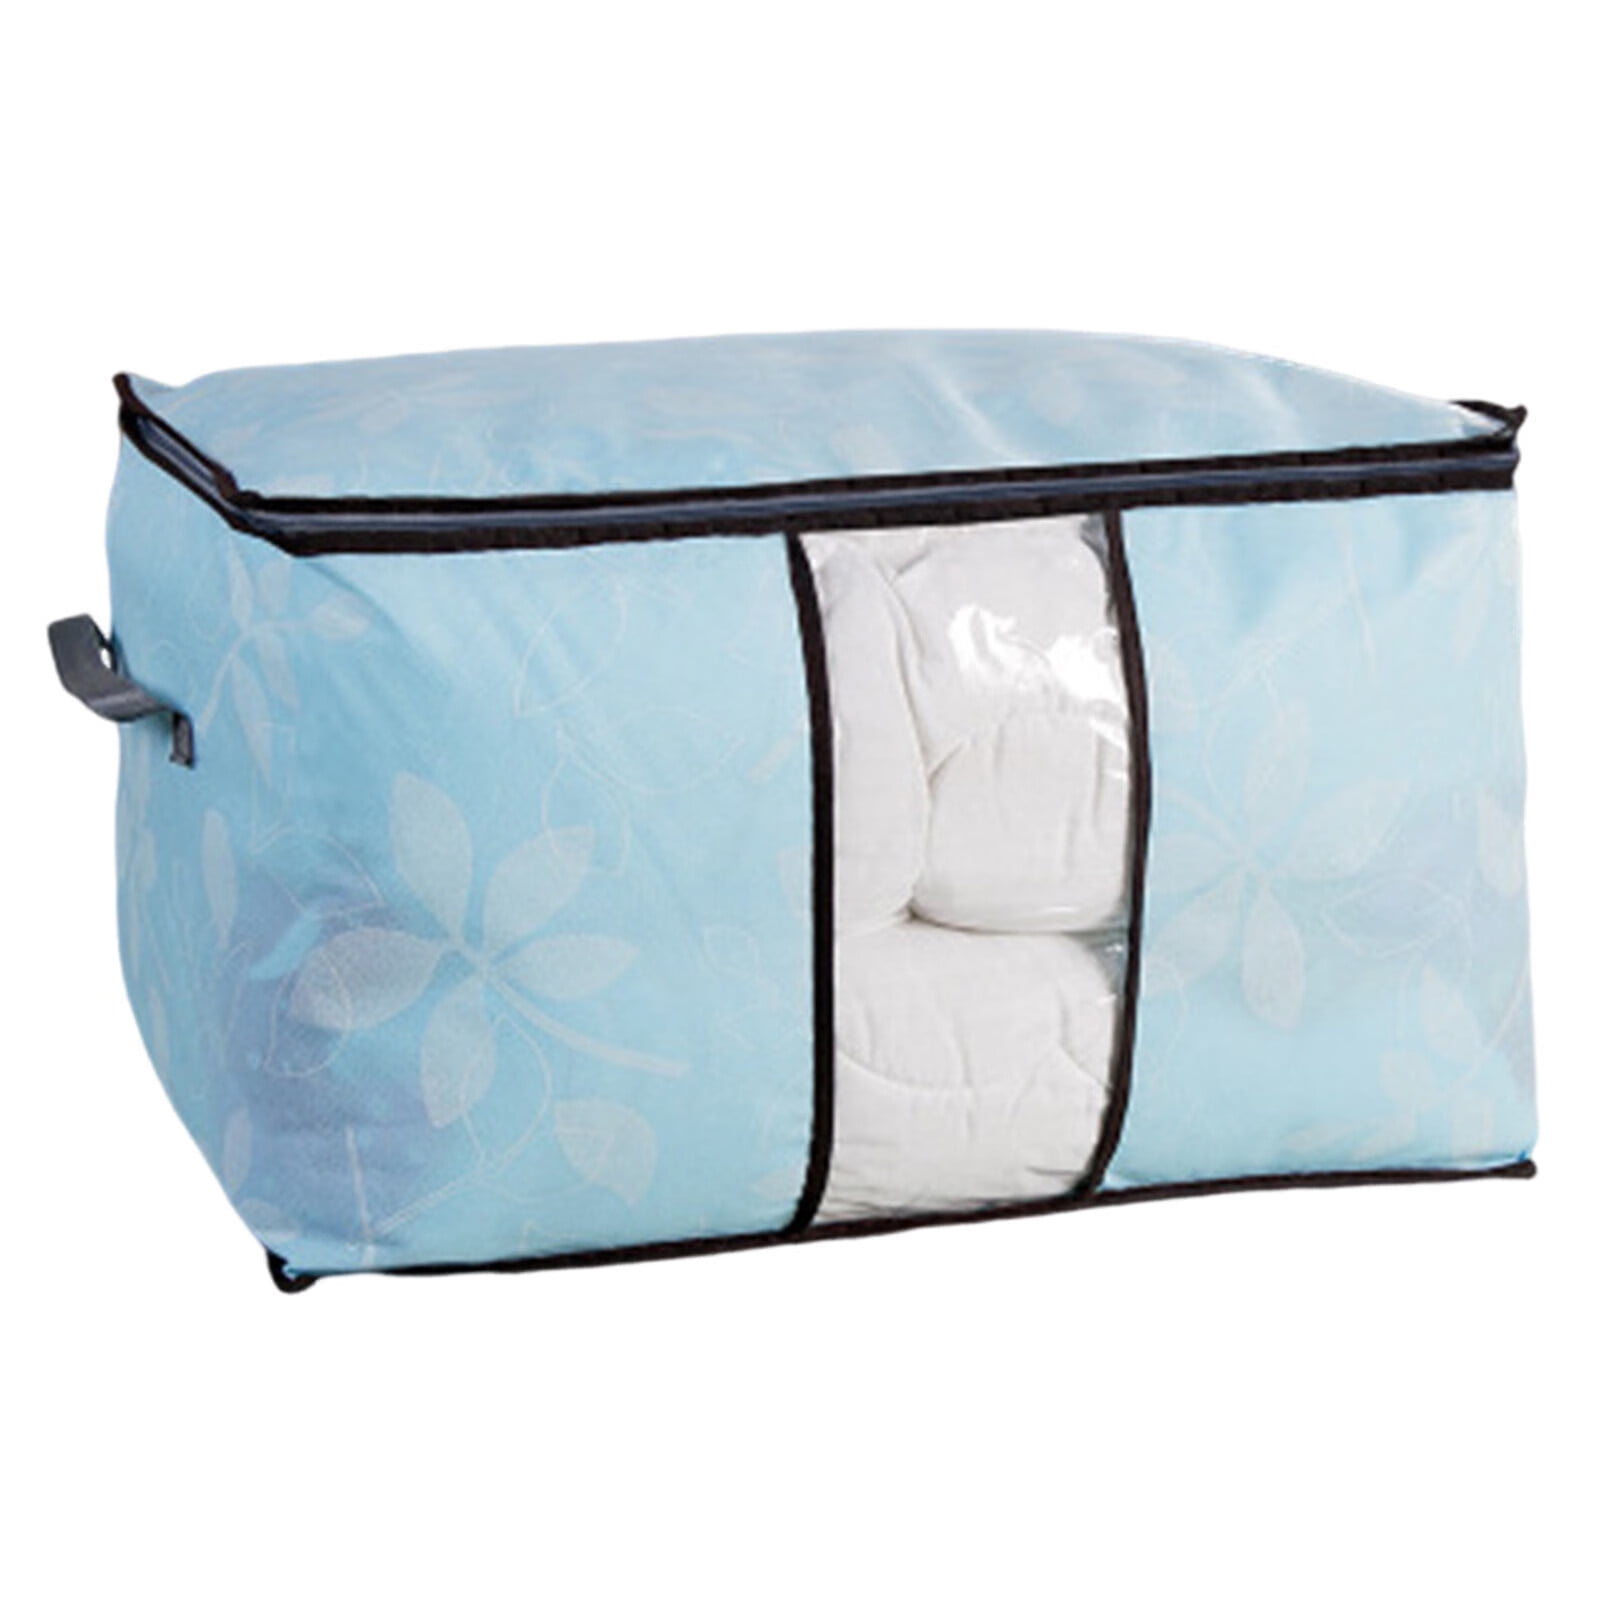 Linencover Large Quilt Storage Bag Soft, Durable, And Spacious